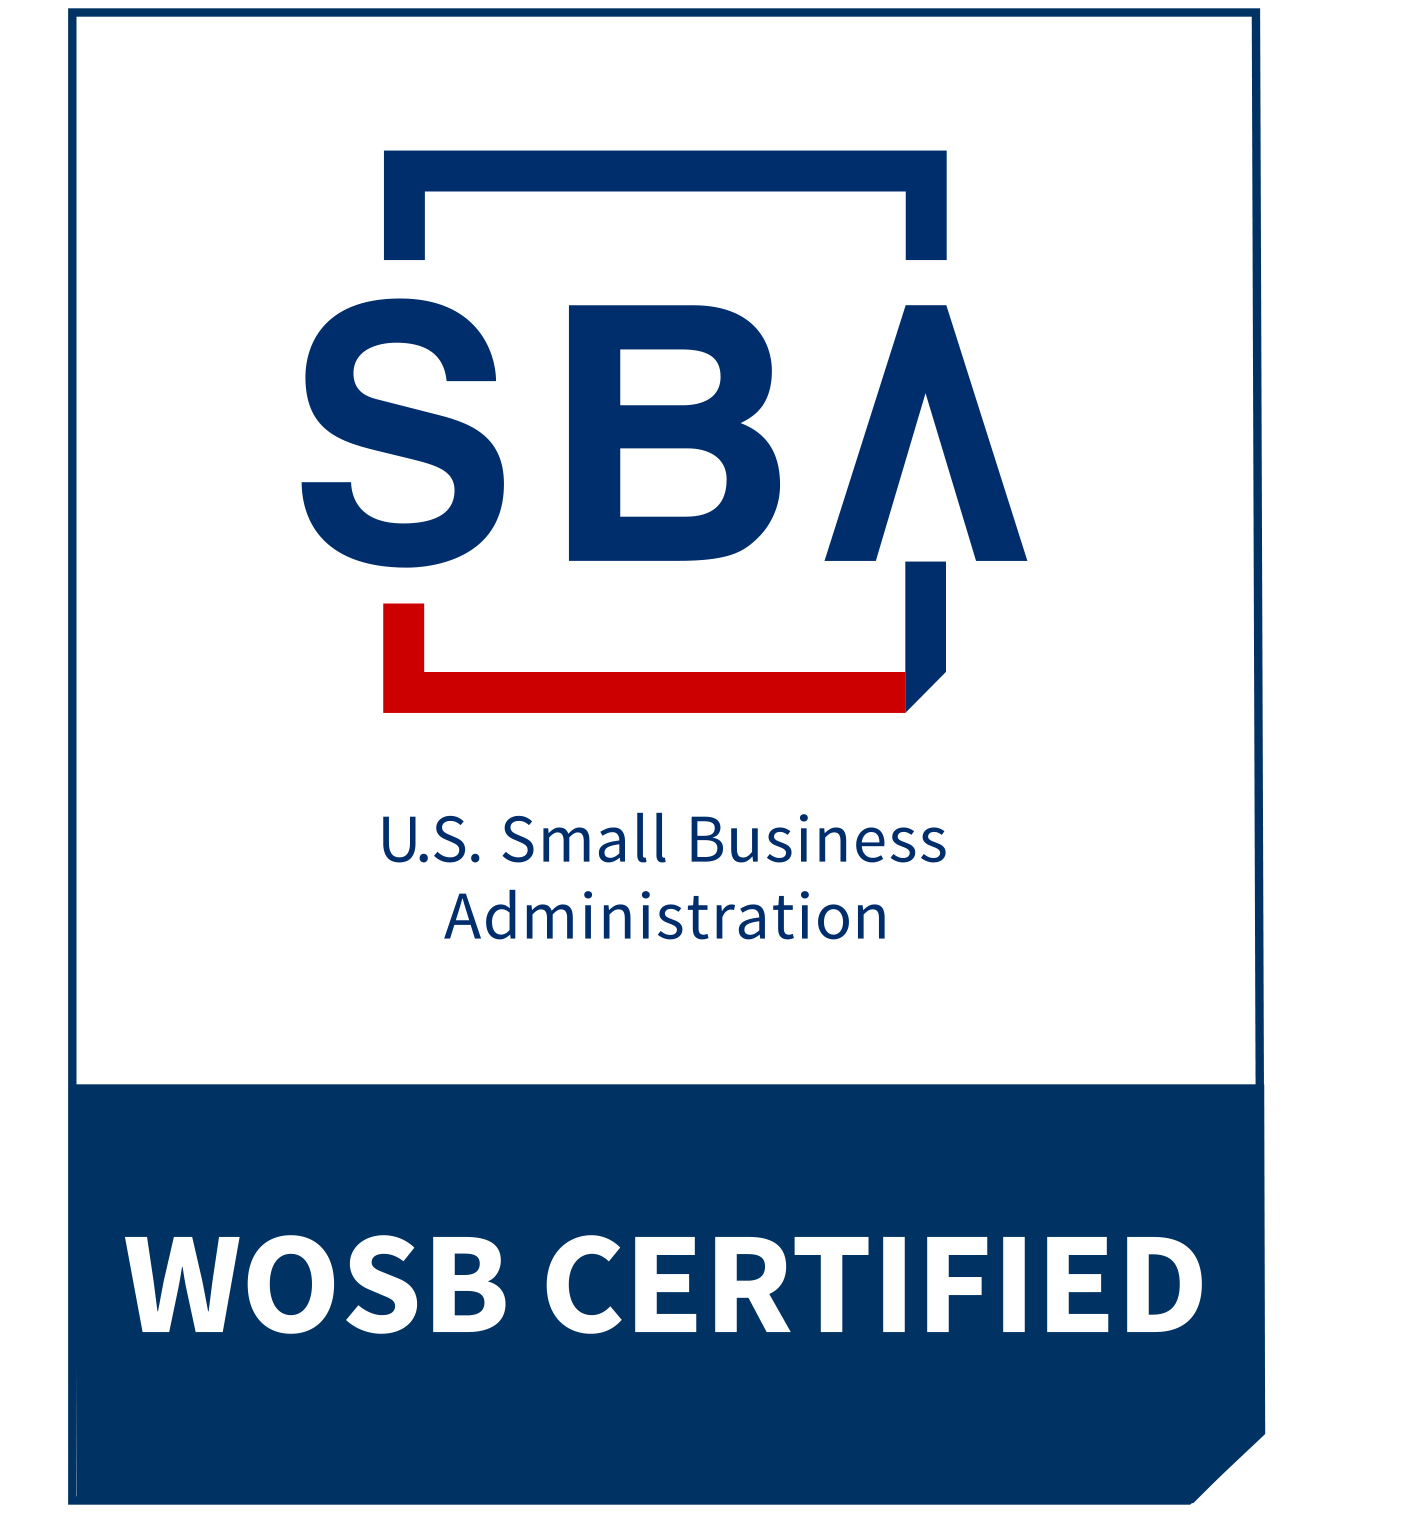 Certified as a Women Owned Small Business WOSB